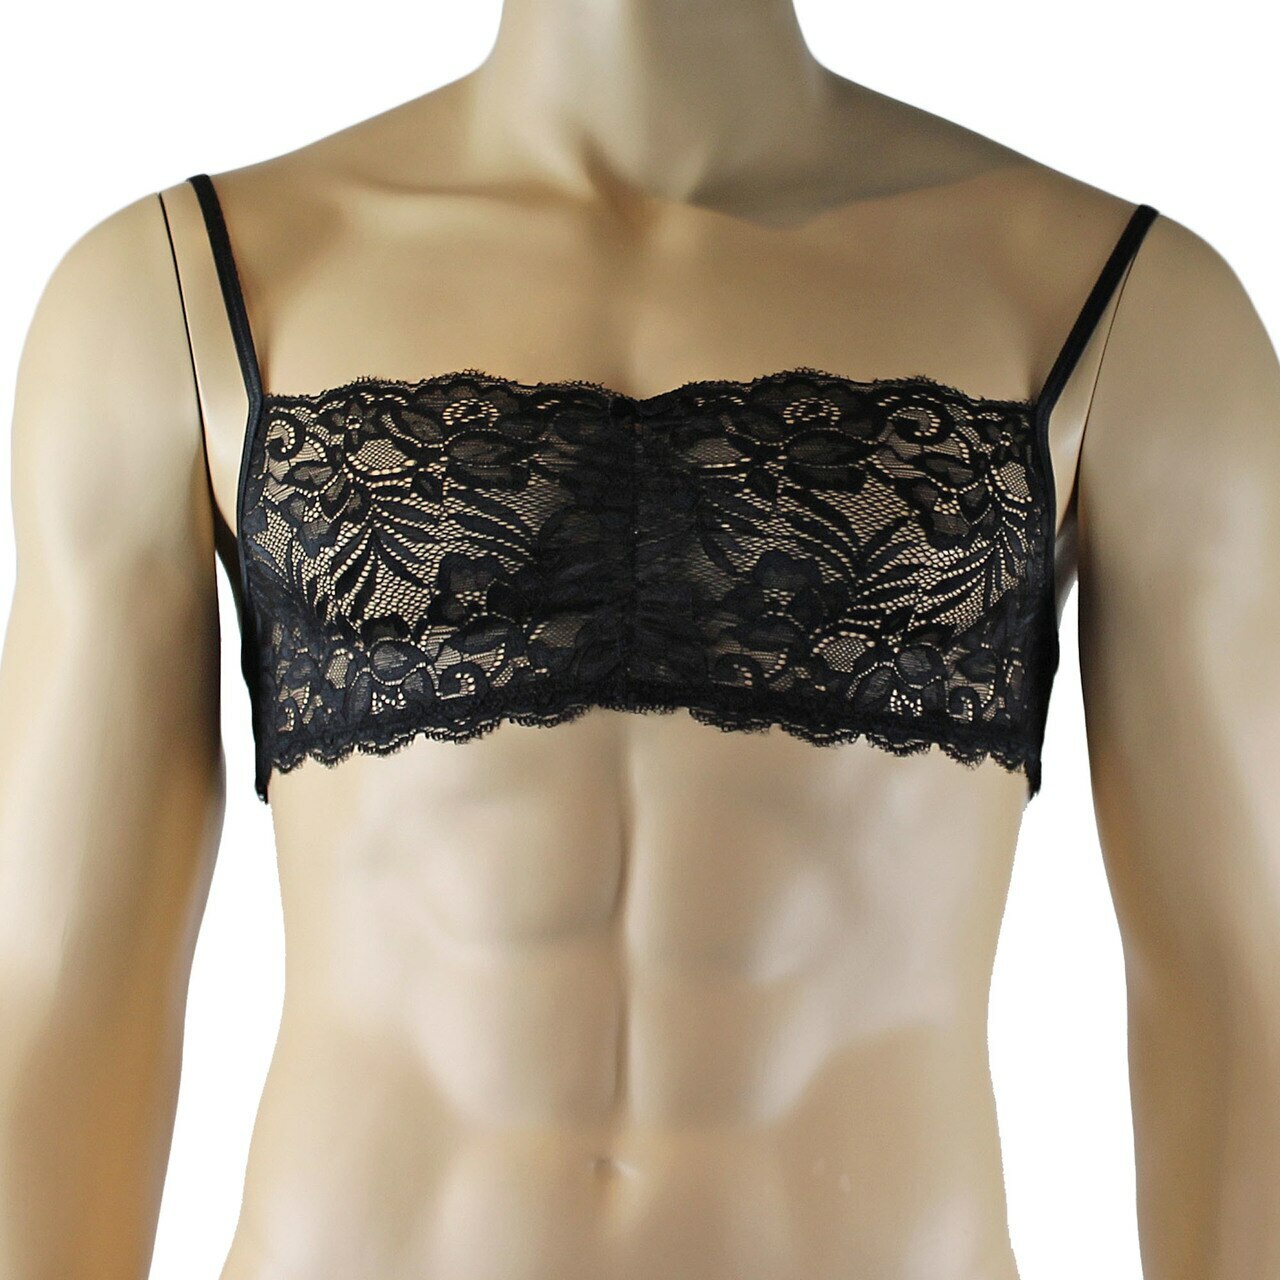 Mens Kristy Lingerie Bra Top and Pouch G string Black